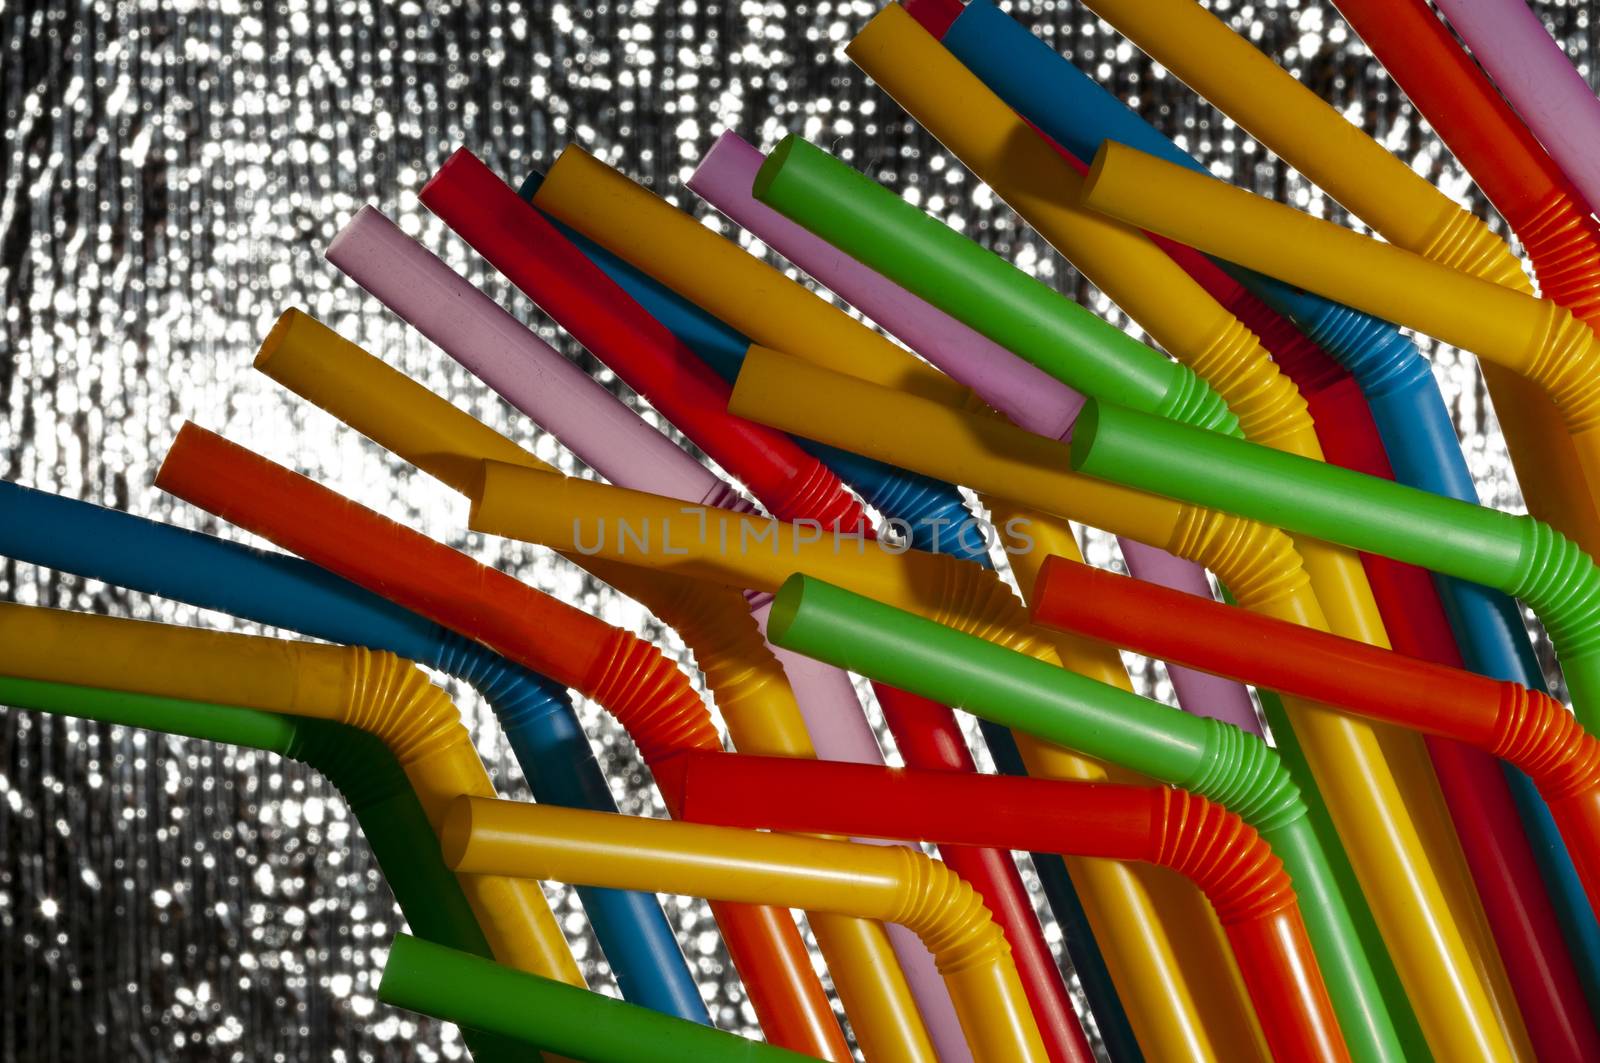 Colorful straws in formation by Haspion